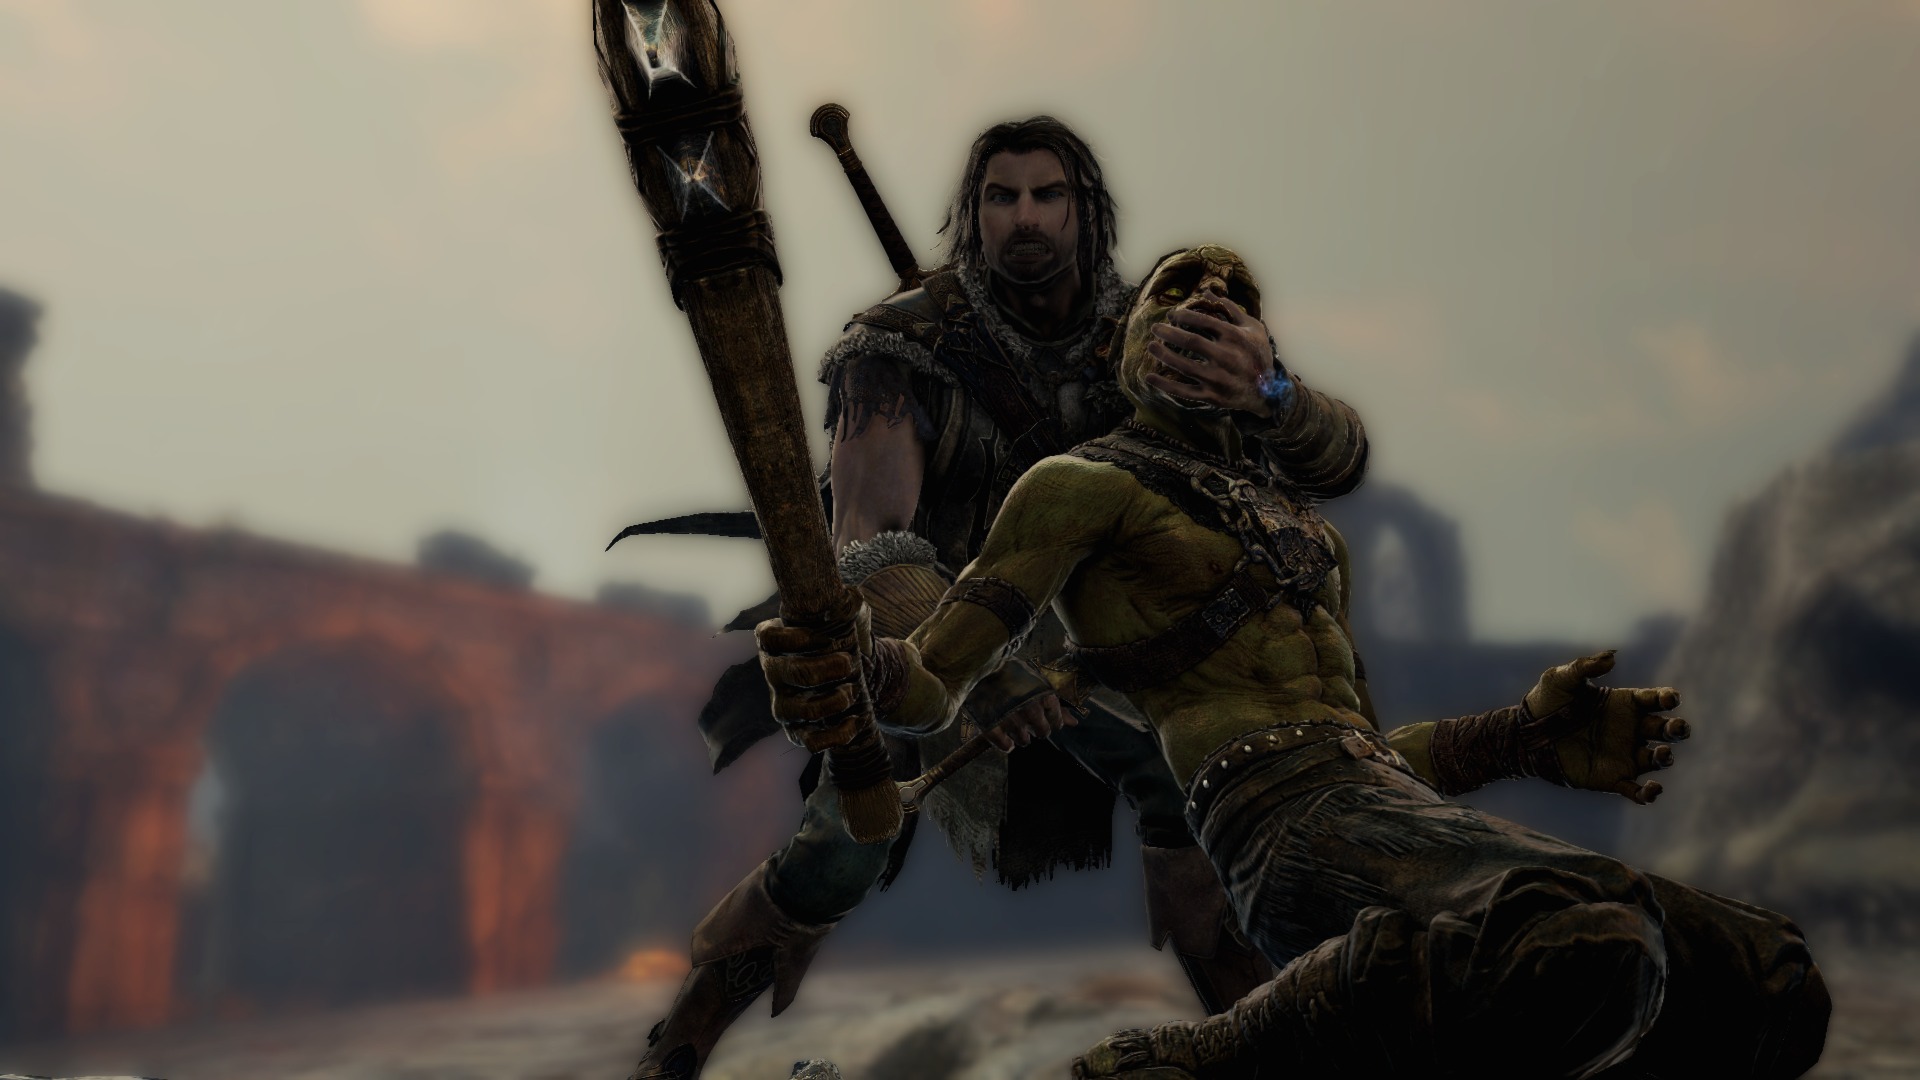 Middle Earth: Shadow of Mordor Photo Mode Update